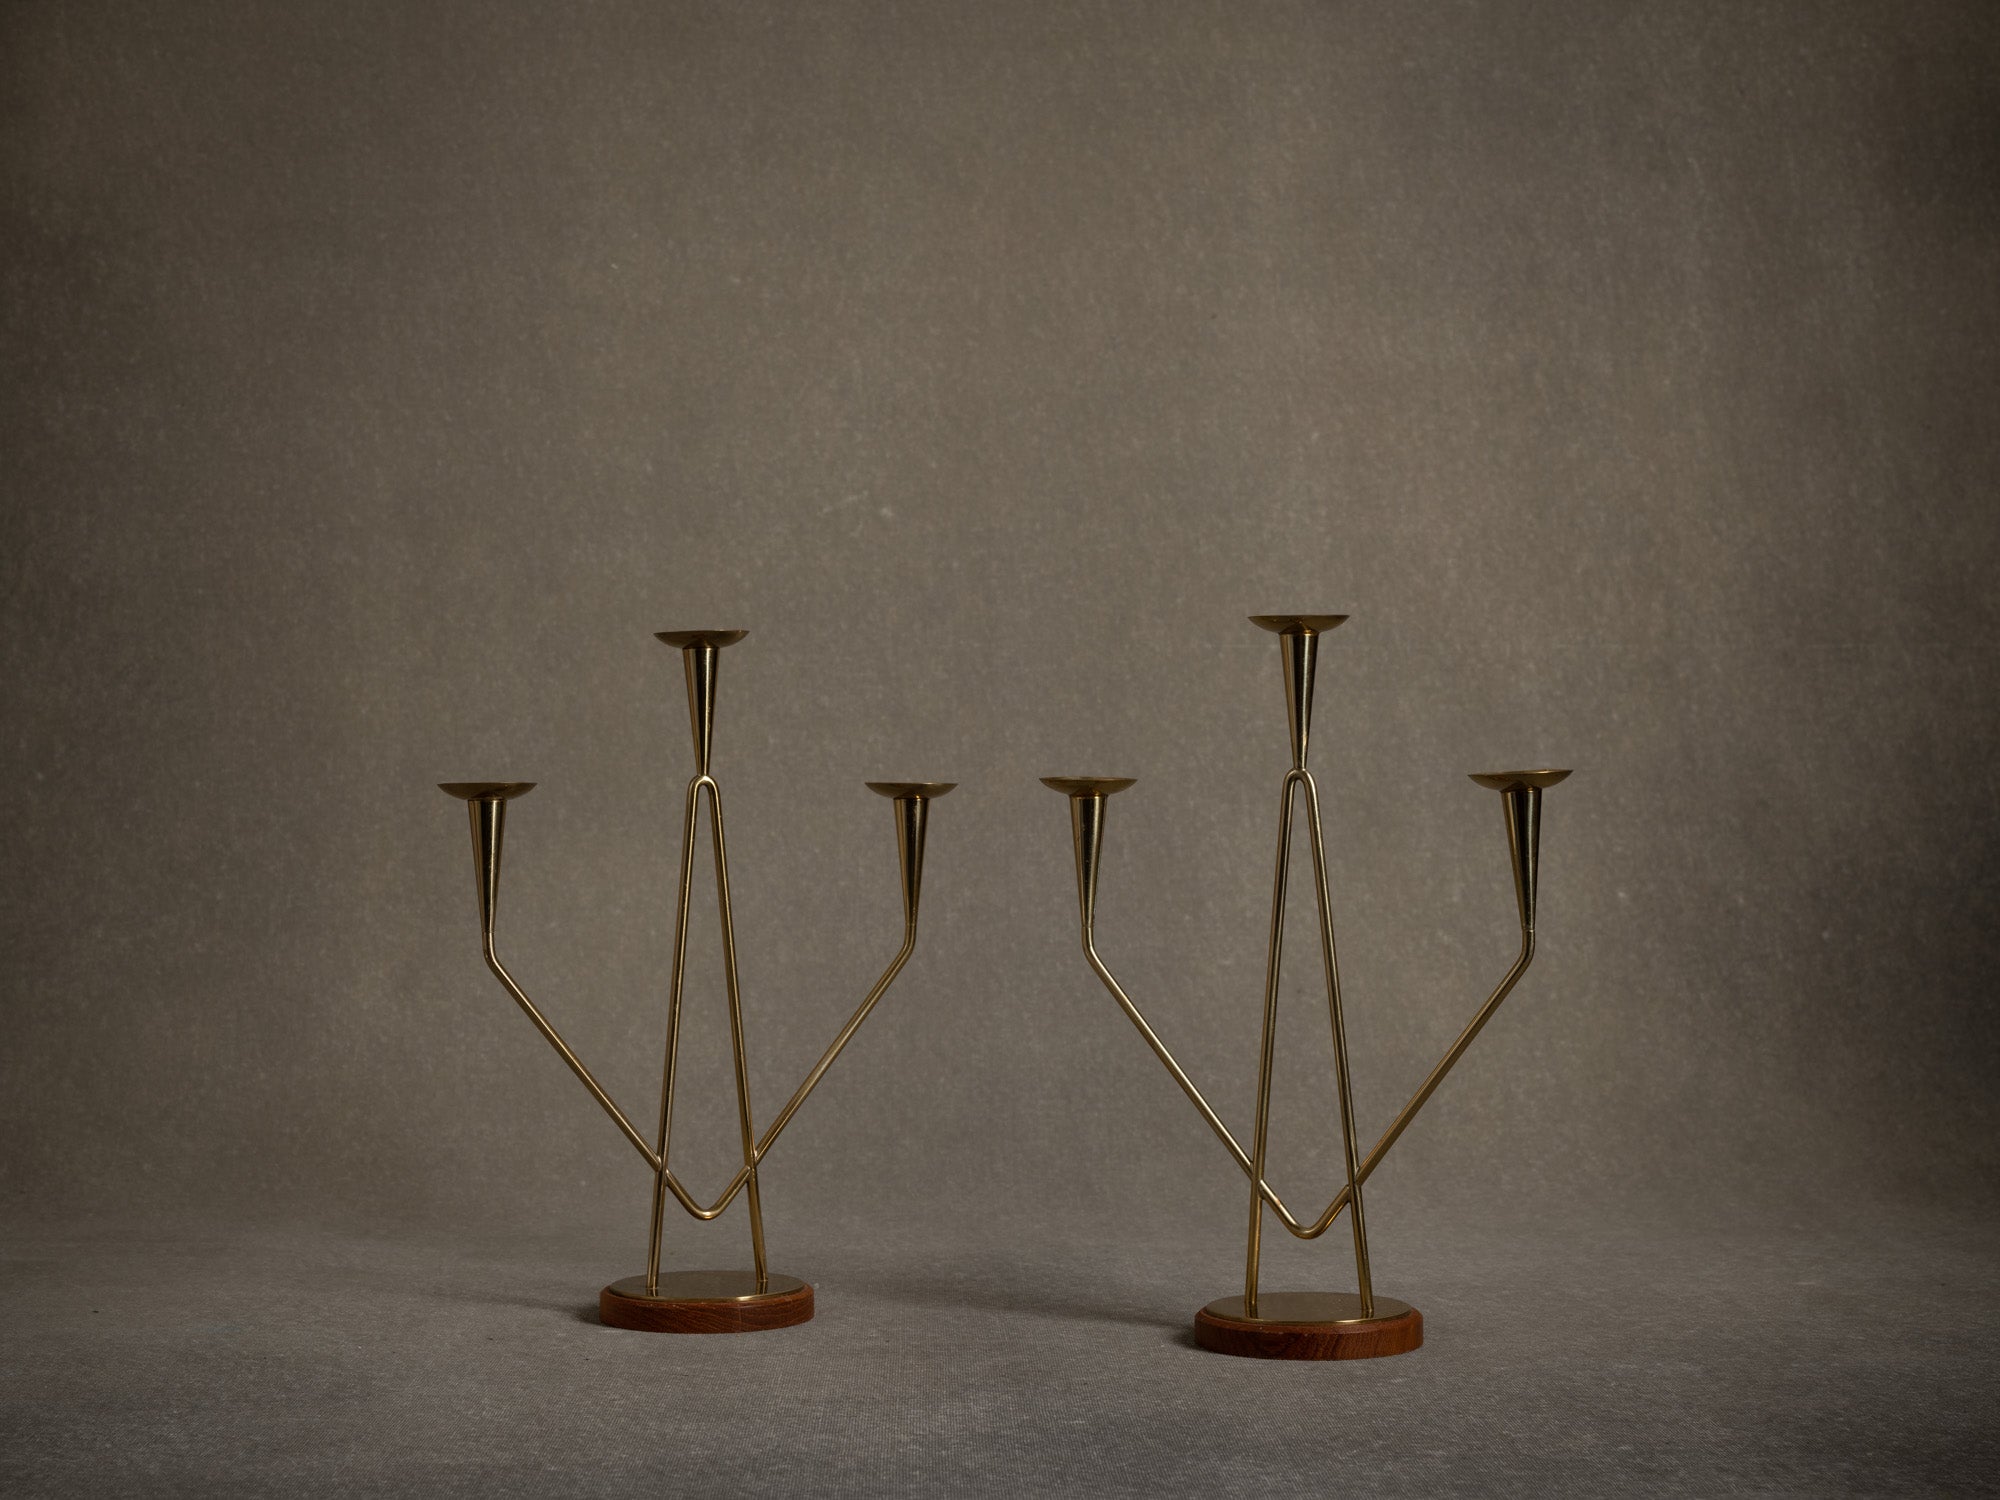 Paire de chandeliers par Gunnar Ander pour Ystad Metall, Suède (début des années 1960)..Set of 2 candle holders /candelabras by Gunnar Ander for Ystad Metall, Sweden (Early 1960's)